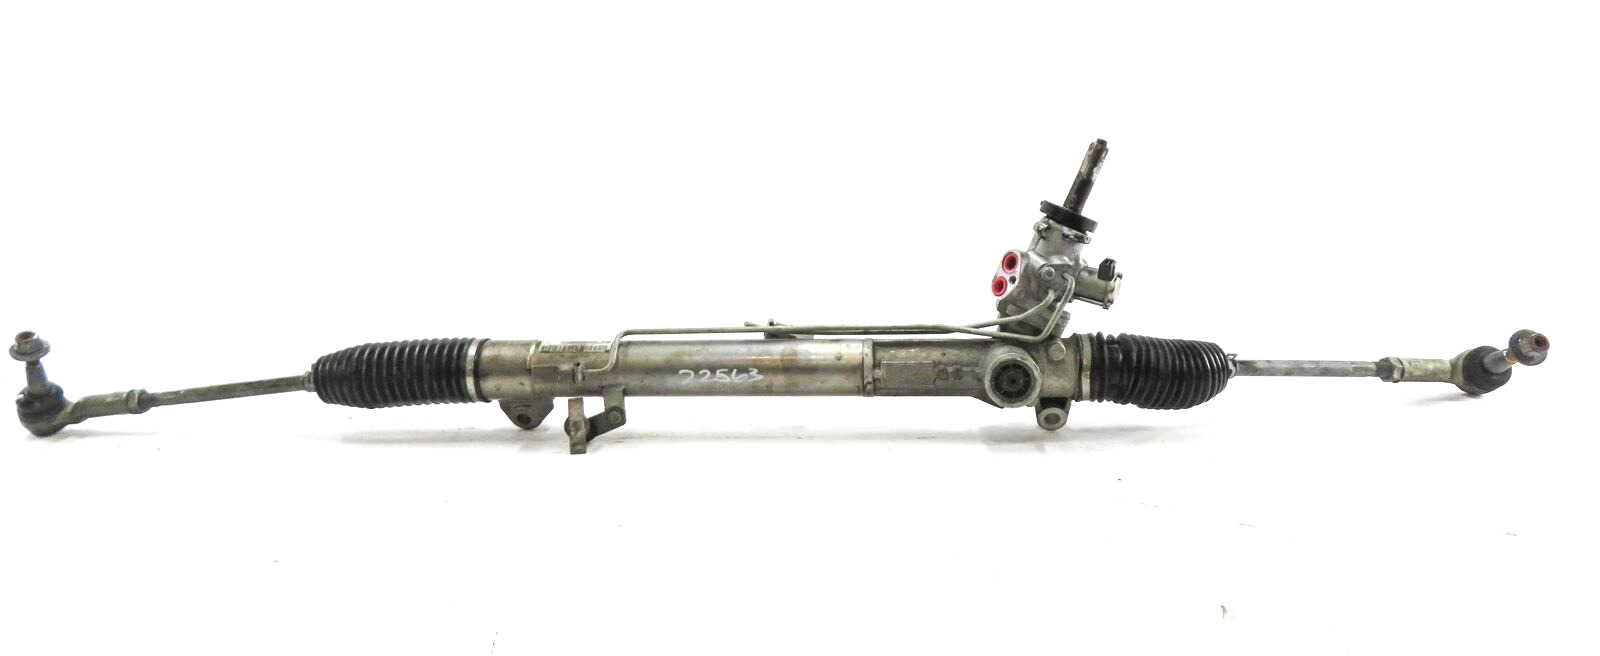 2009-2013 RANGE ROVER SPORT (L320) POWER STEERING GEAR RACK & PINION ASSEMBLY